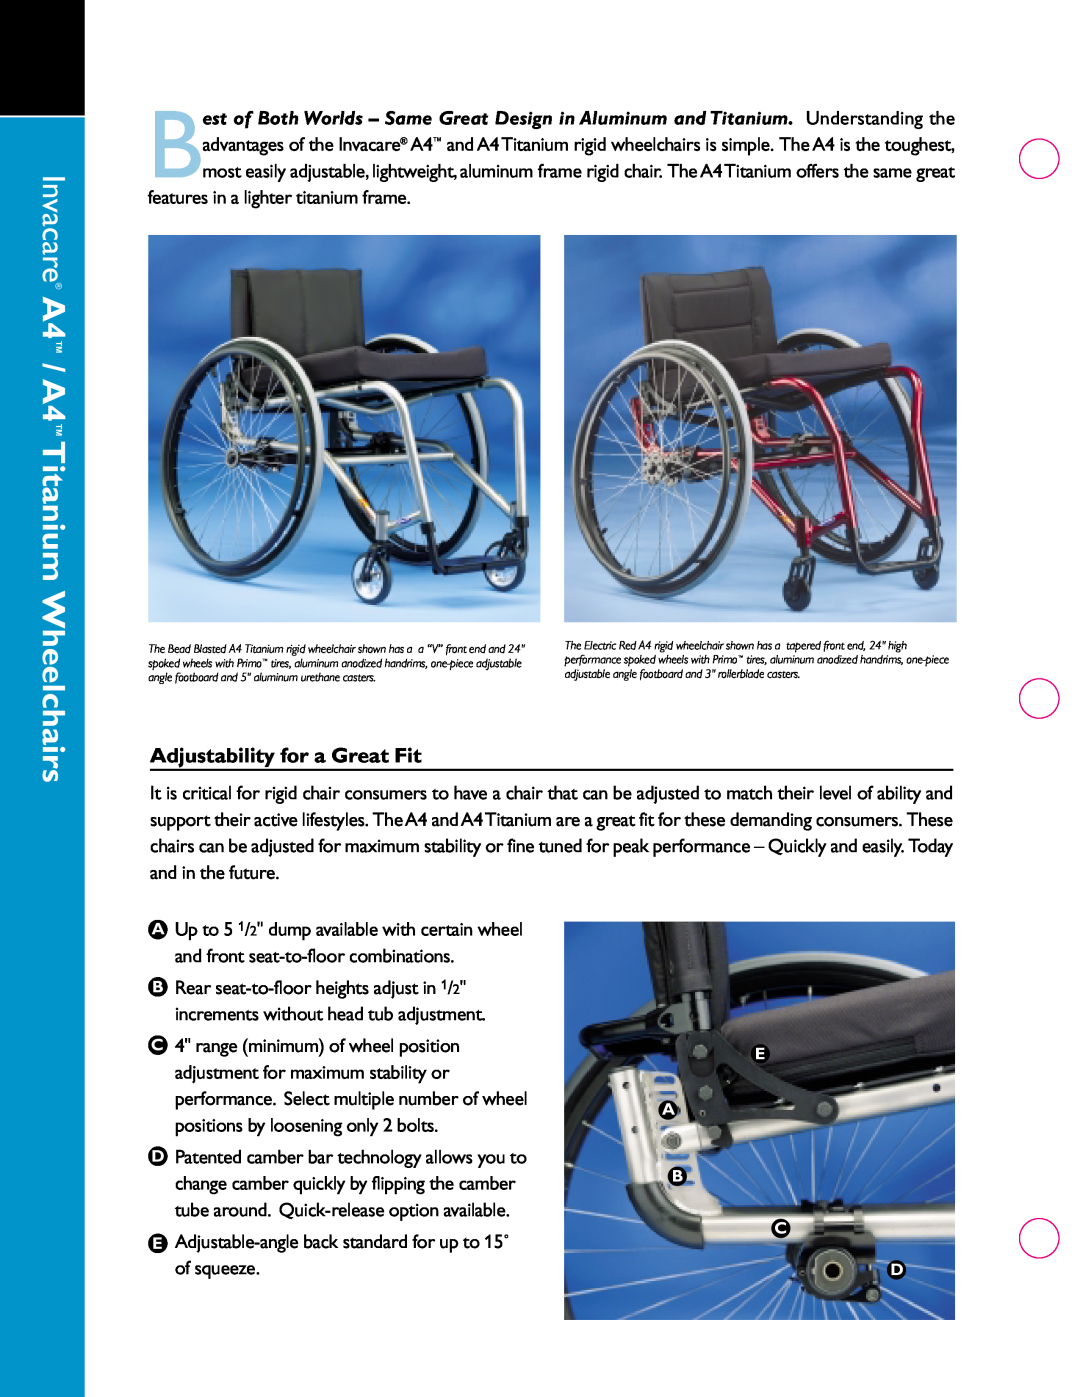 Invacare A4TM manual Invacare A4 / A4 Titanium Wheelchairs, Adjustability for a Great Fit 